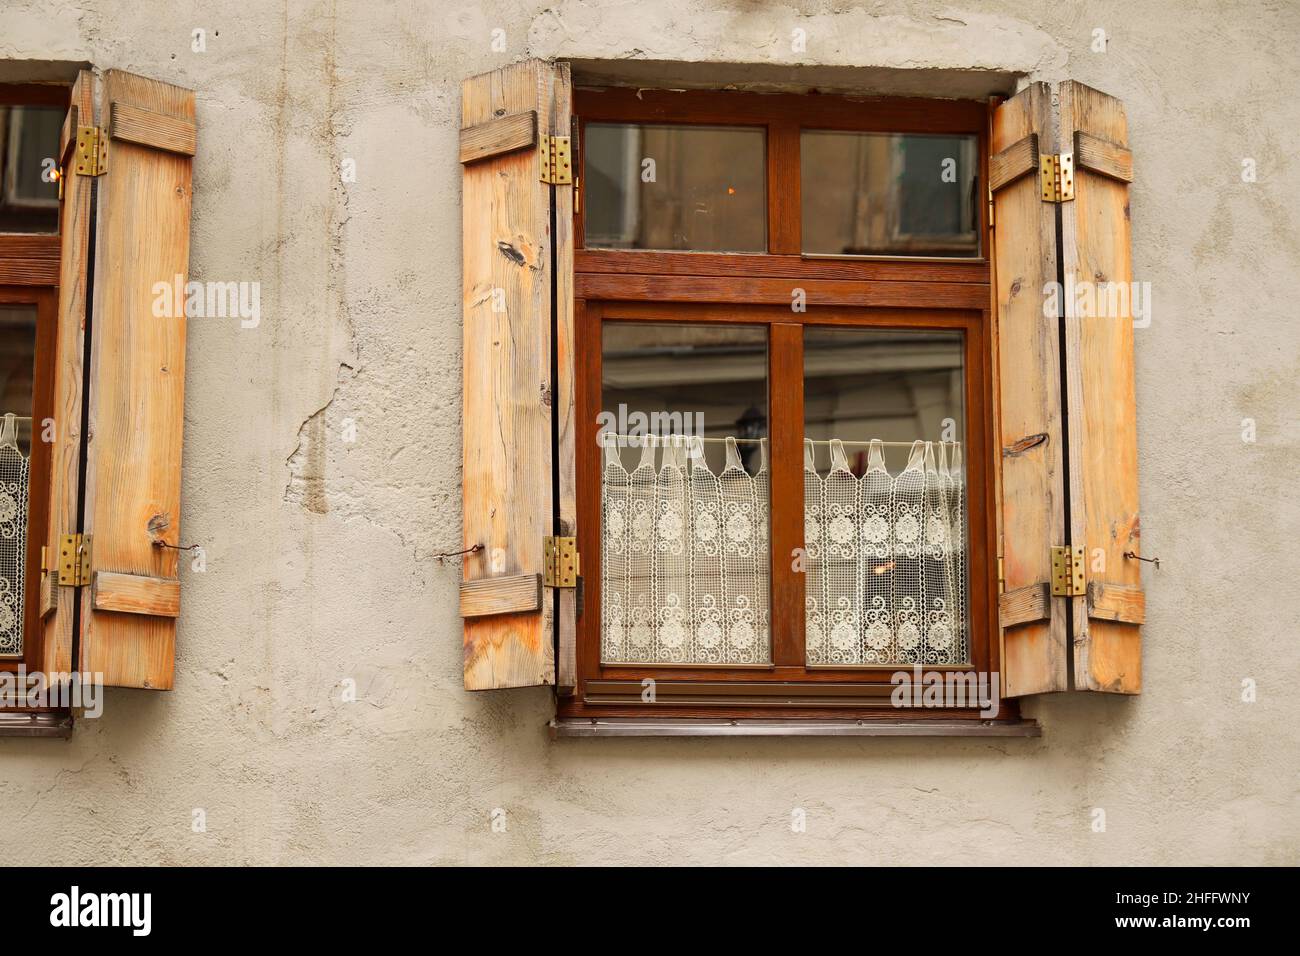 Old window with open wooden shutters. Texture background, window on the wall of a stone house wooden window shutters. Vintage architecture in old city Stock Photo